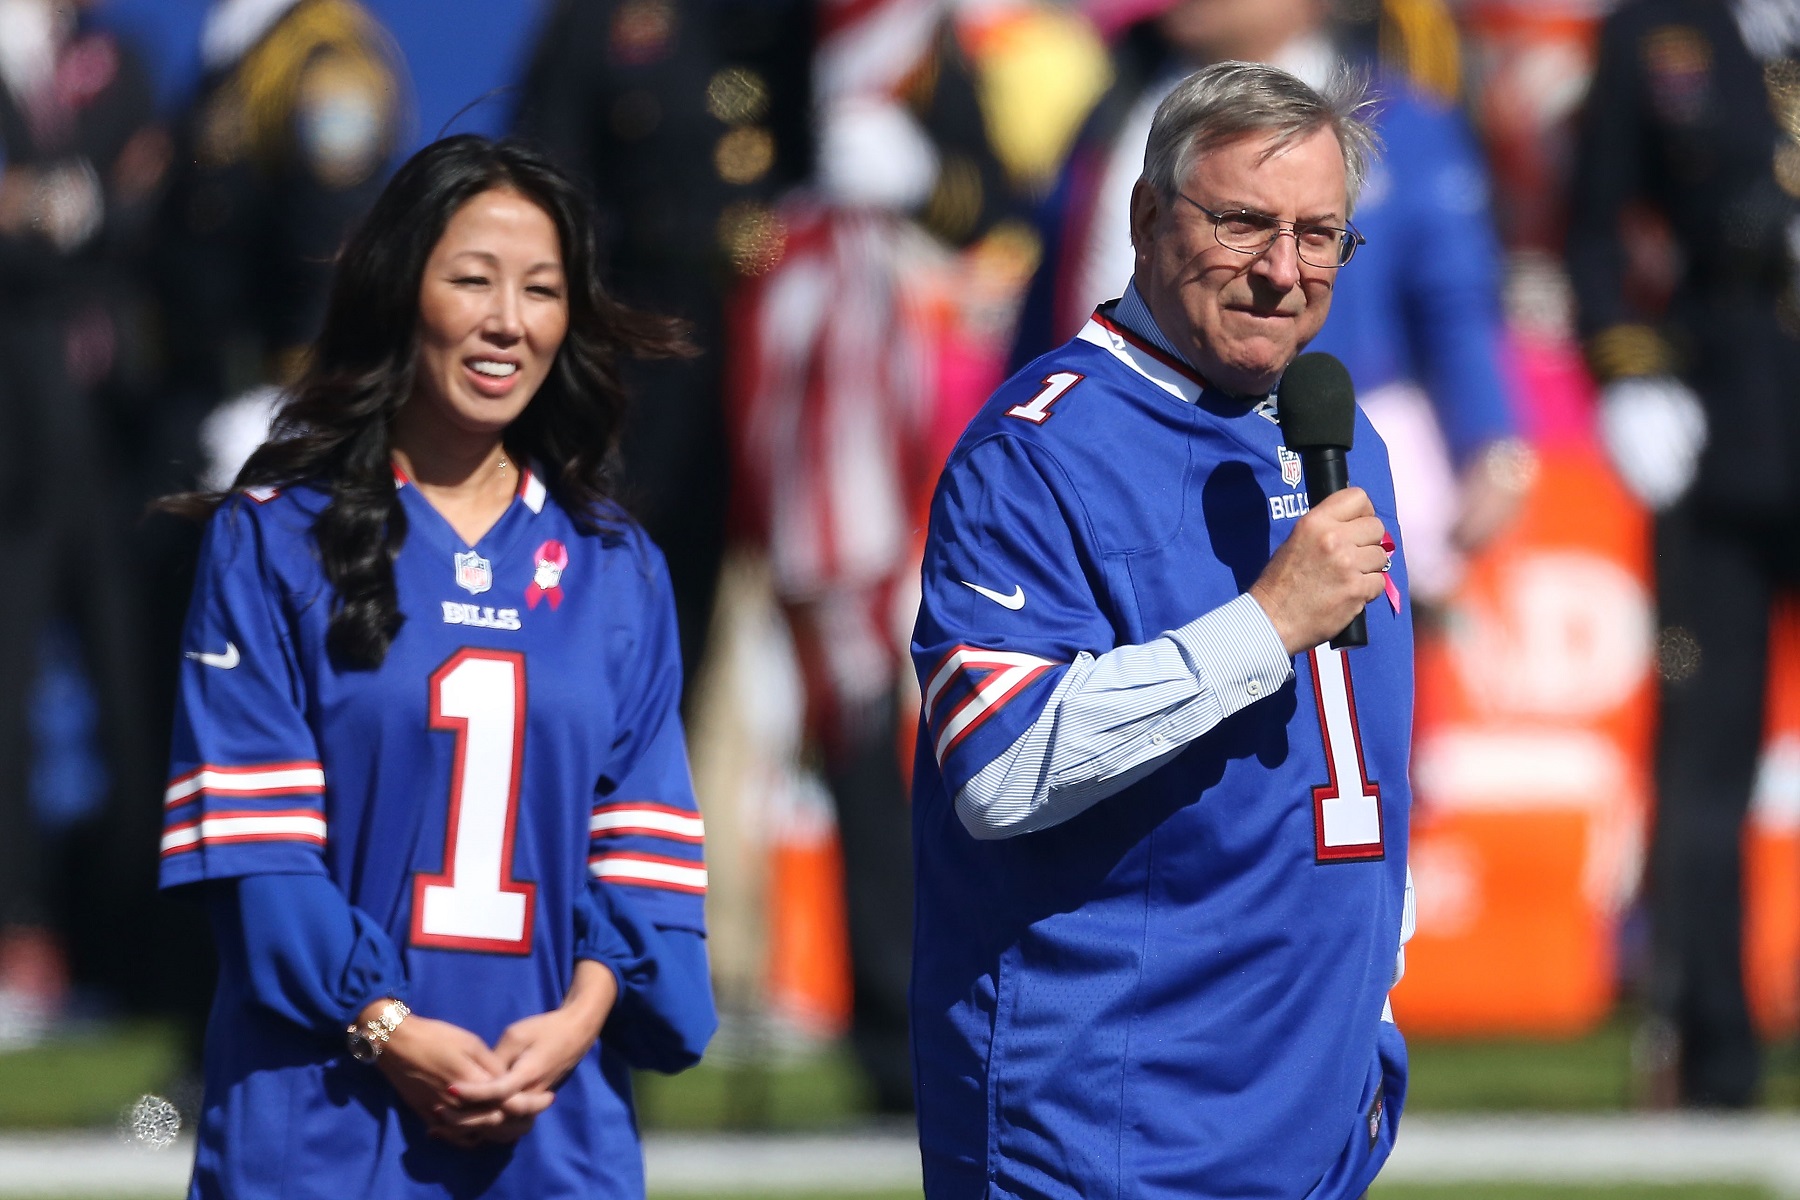 Kim and Terry Pegula bought the NFL's Buffalo Bills in 2014